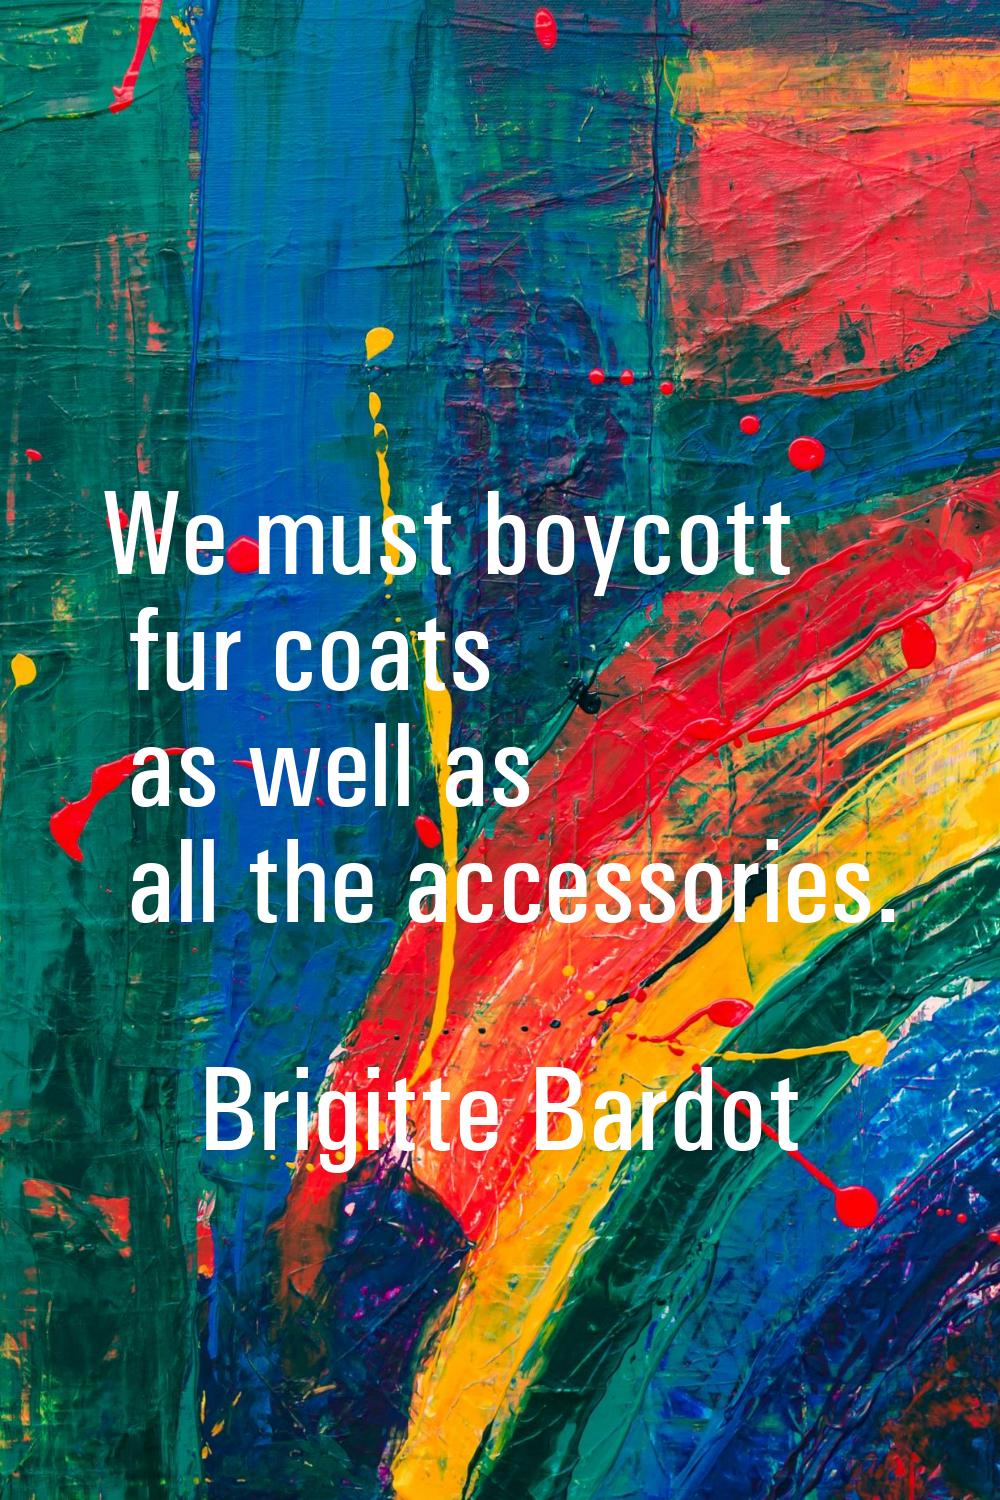 We must boycott fur coats as well as all the accessories.